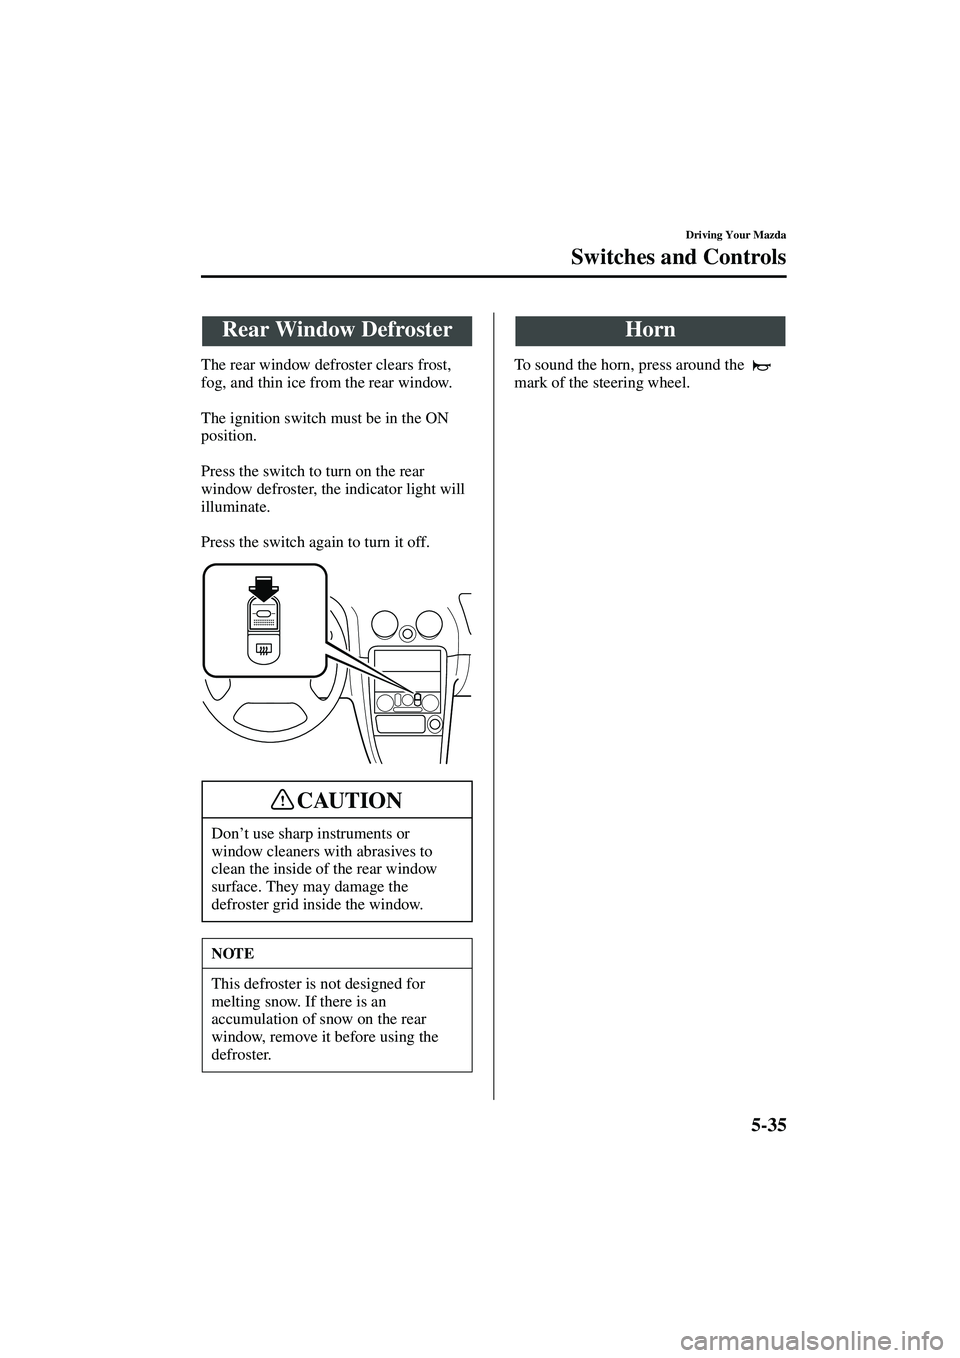 MAZDA MODEL MX-5 MIATA 2004  Owners Manual 5-35
Driving Your Mazda
Switches and Controls
Form No. 8S15-EA-03G
The rear window defroster clears frost, 
fog, and thin ice from the rear window.
The ignition switch must be in the ON 
position.
Pre